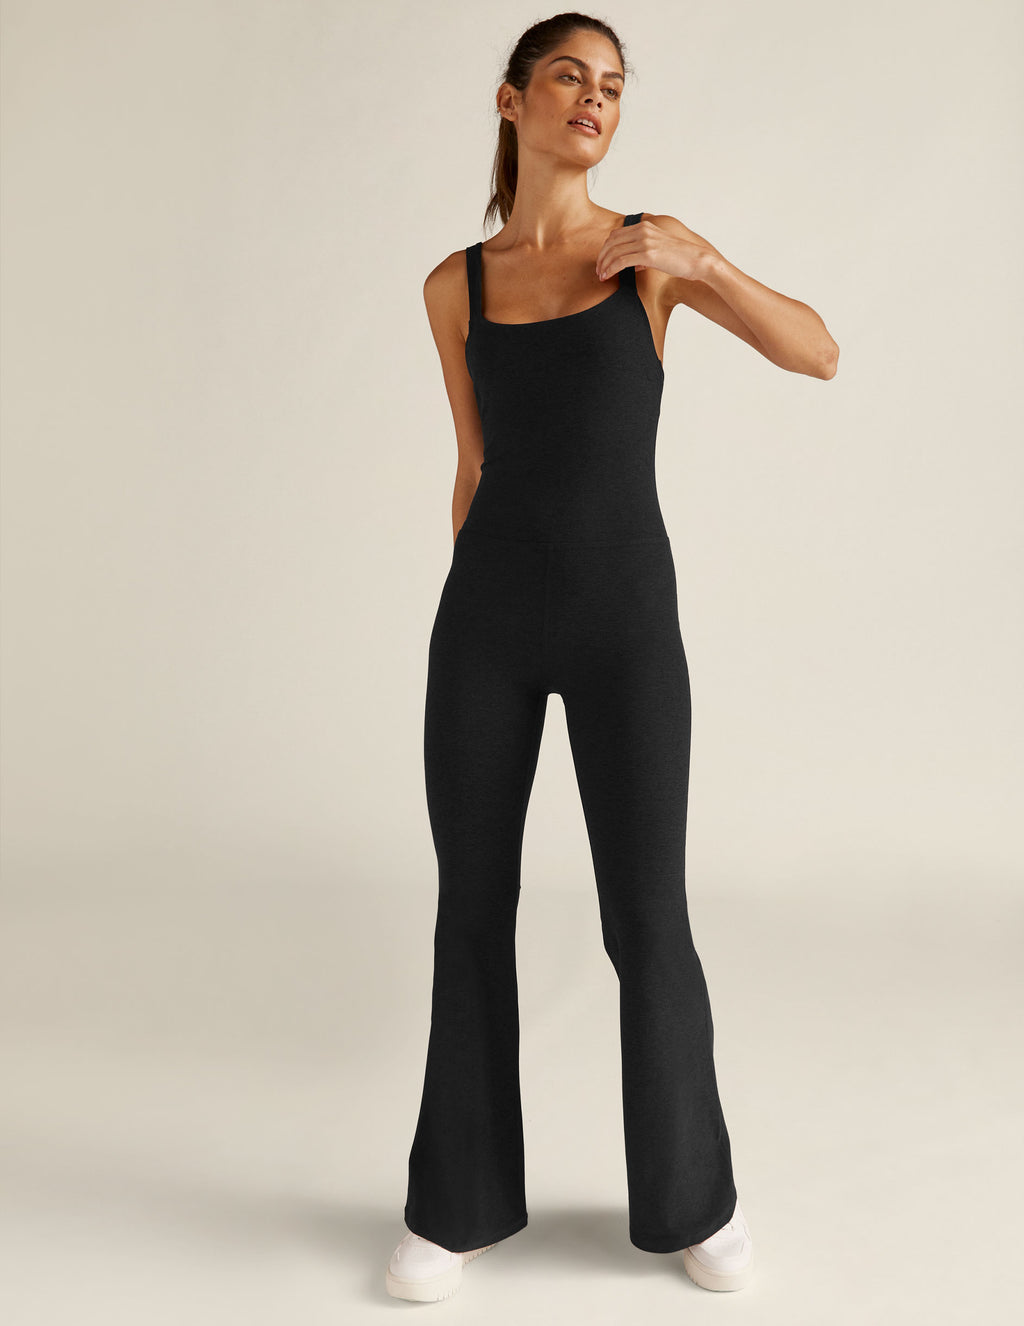 Dresses & Jumpsuits - The Softest All-In-One Outfits | Beyond Yoga